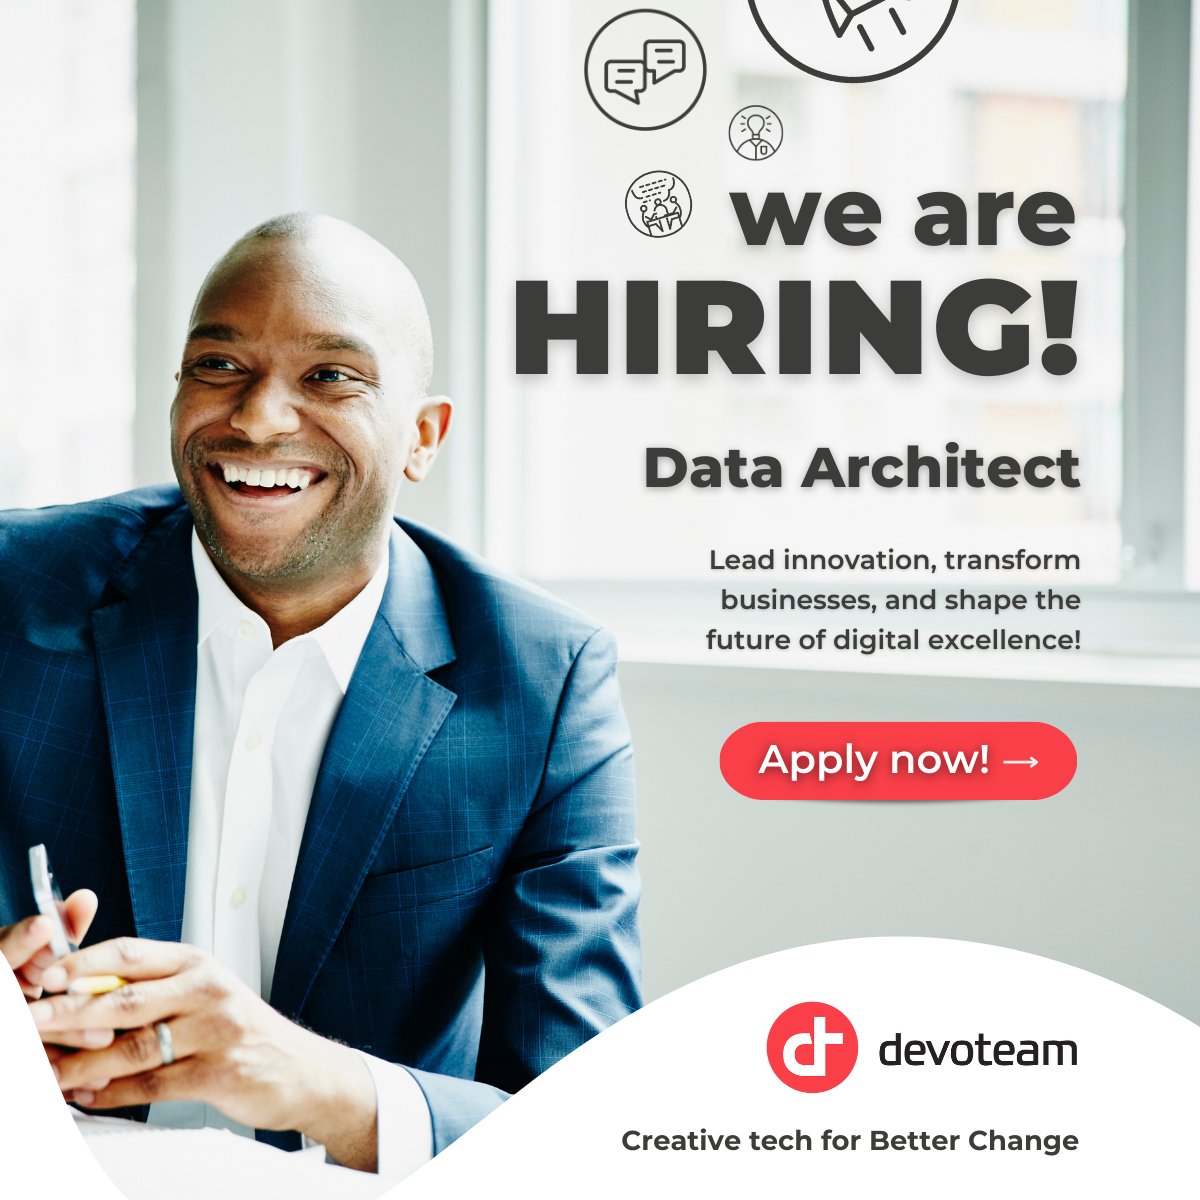 🚀 Join us as a Data Architect and experience the thrill of impactful projects at Devoteam! 🎯

🖱 lnkd.in/eiAwaiXp

⸻
#DataArchitect #DigitalTransformation #ImpactfulProjects #InfinitePossibilities